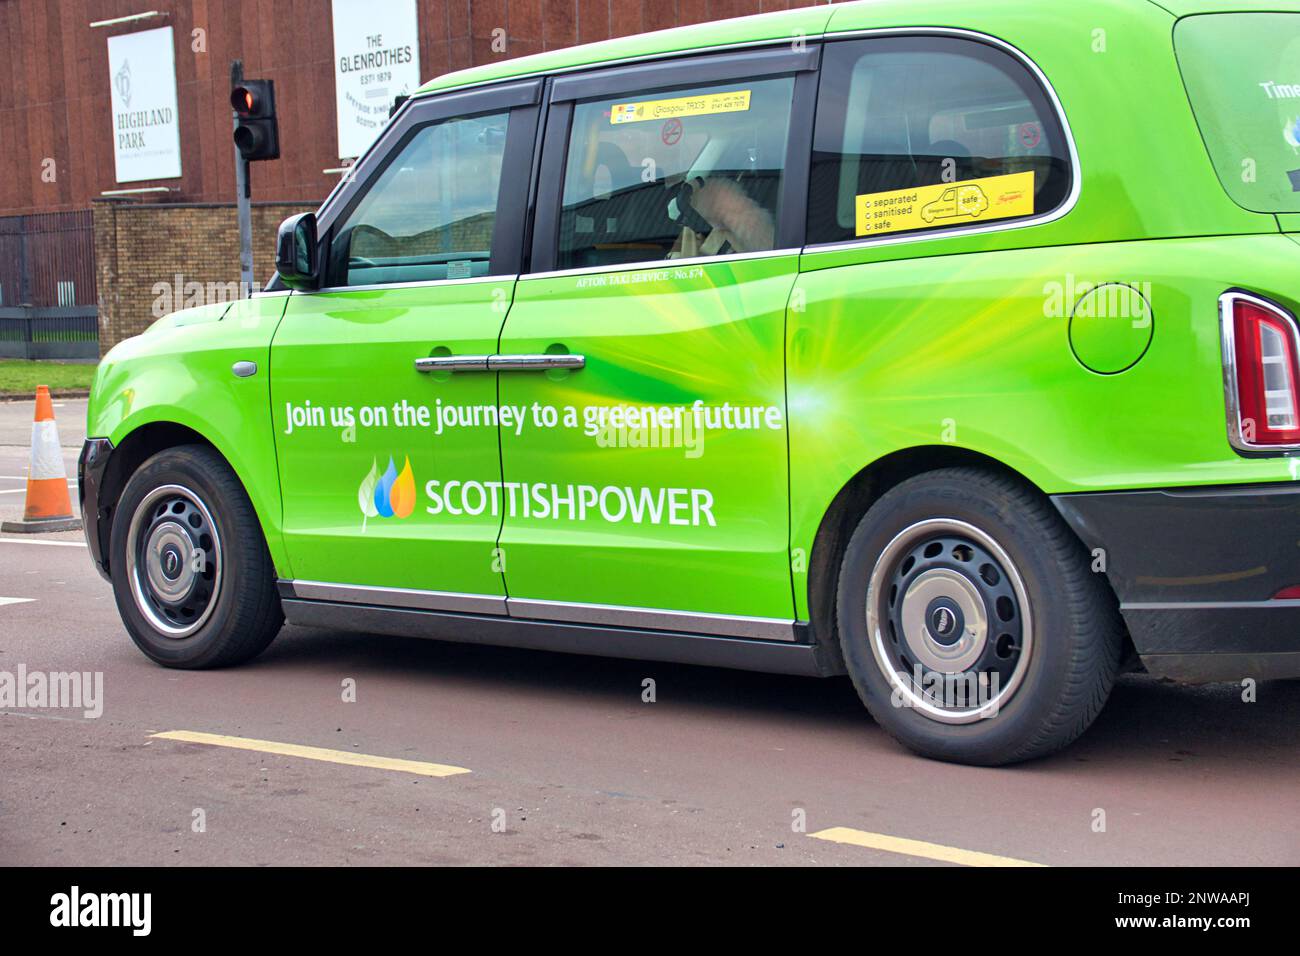 scottish power green electricity advert on a taxi Stock Photo